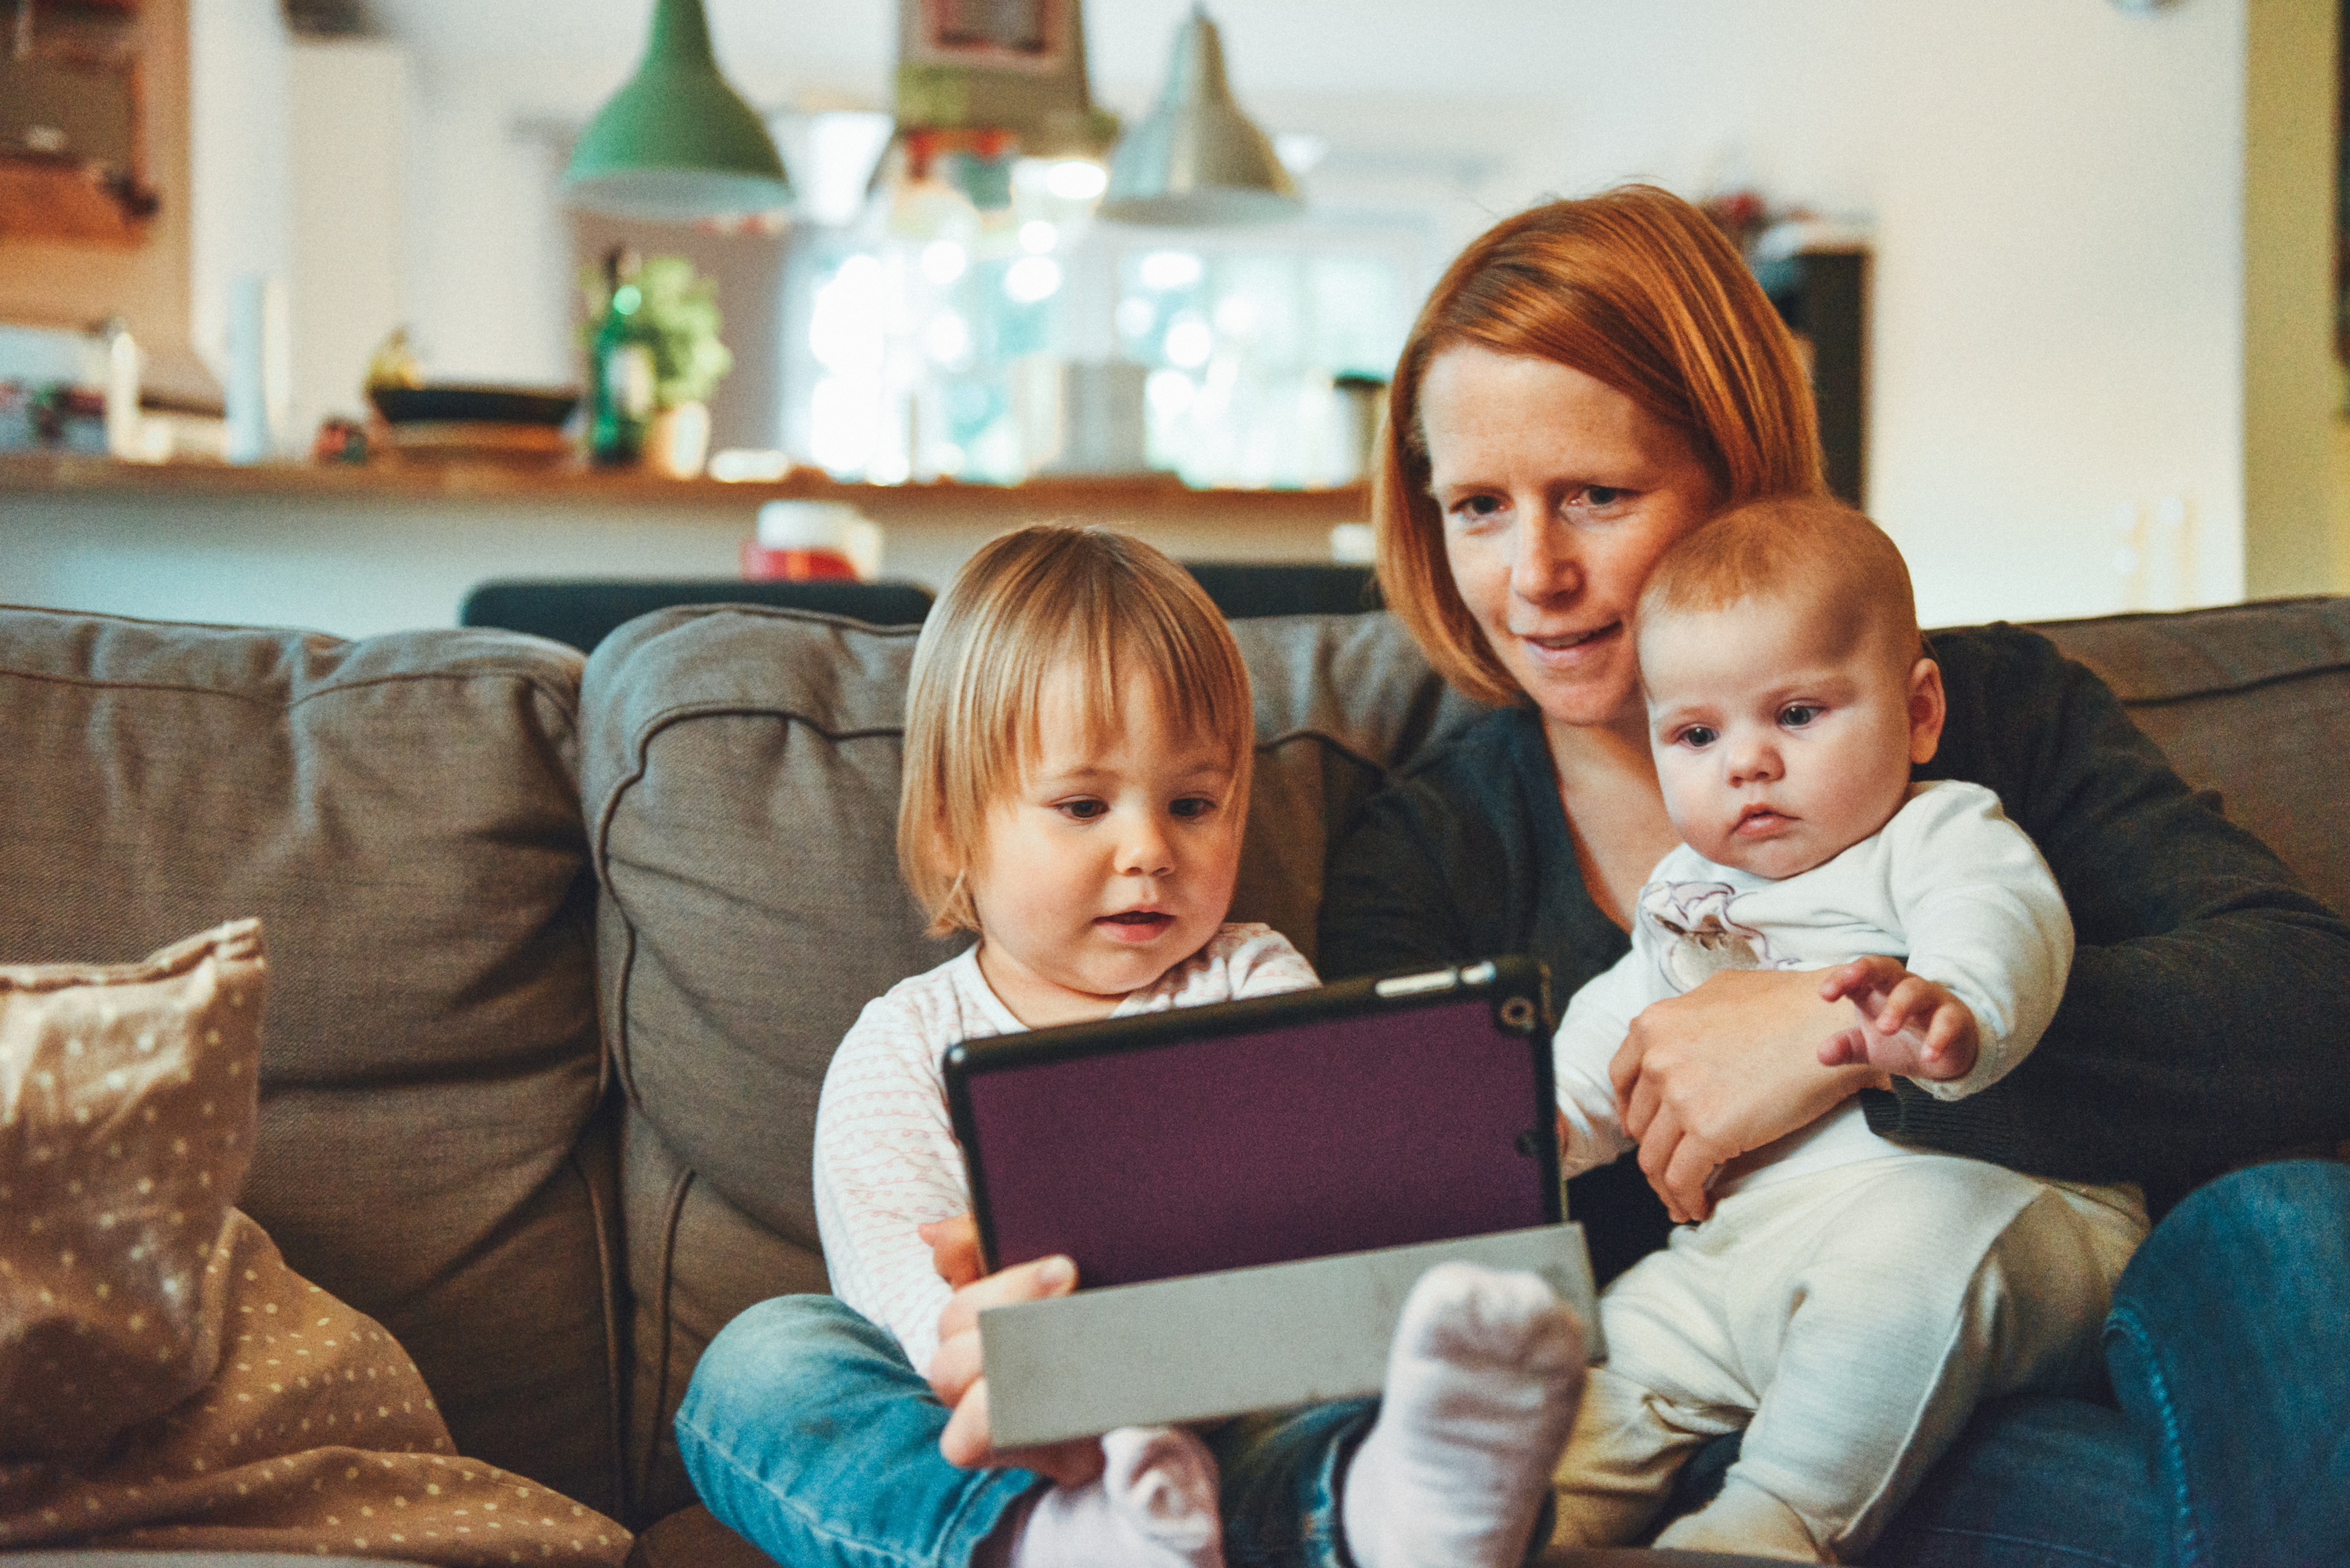 A mother with her children looking at a tablet device